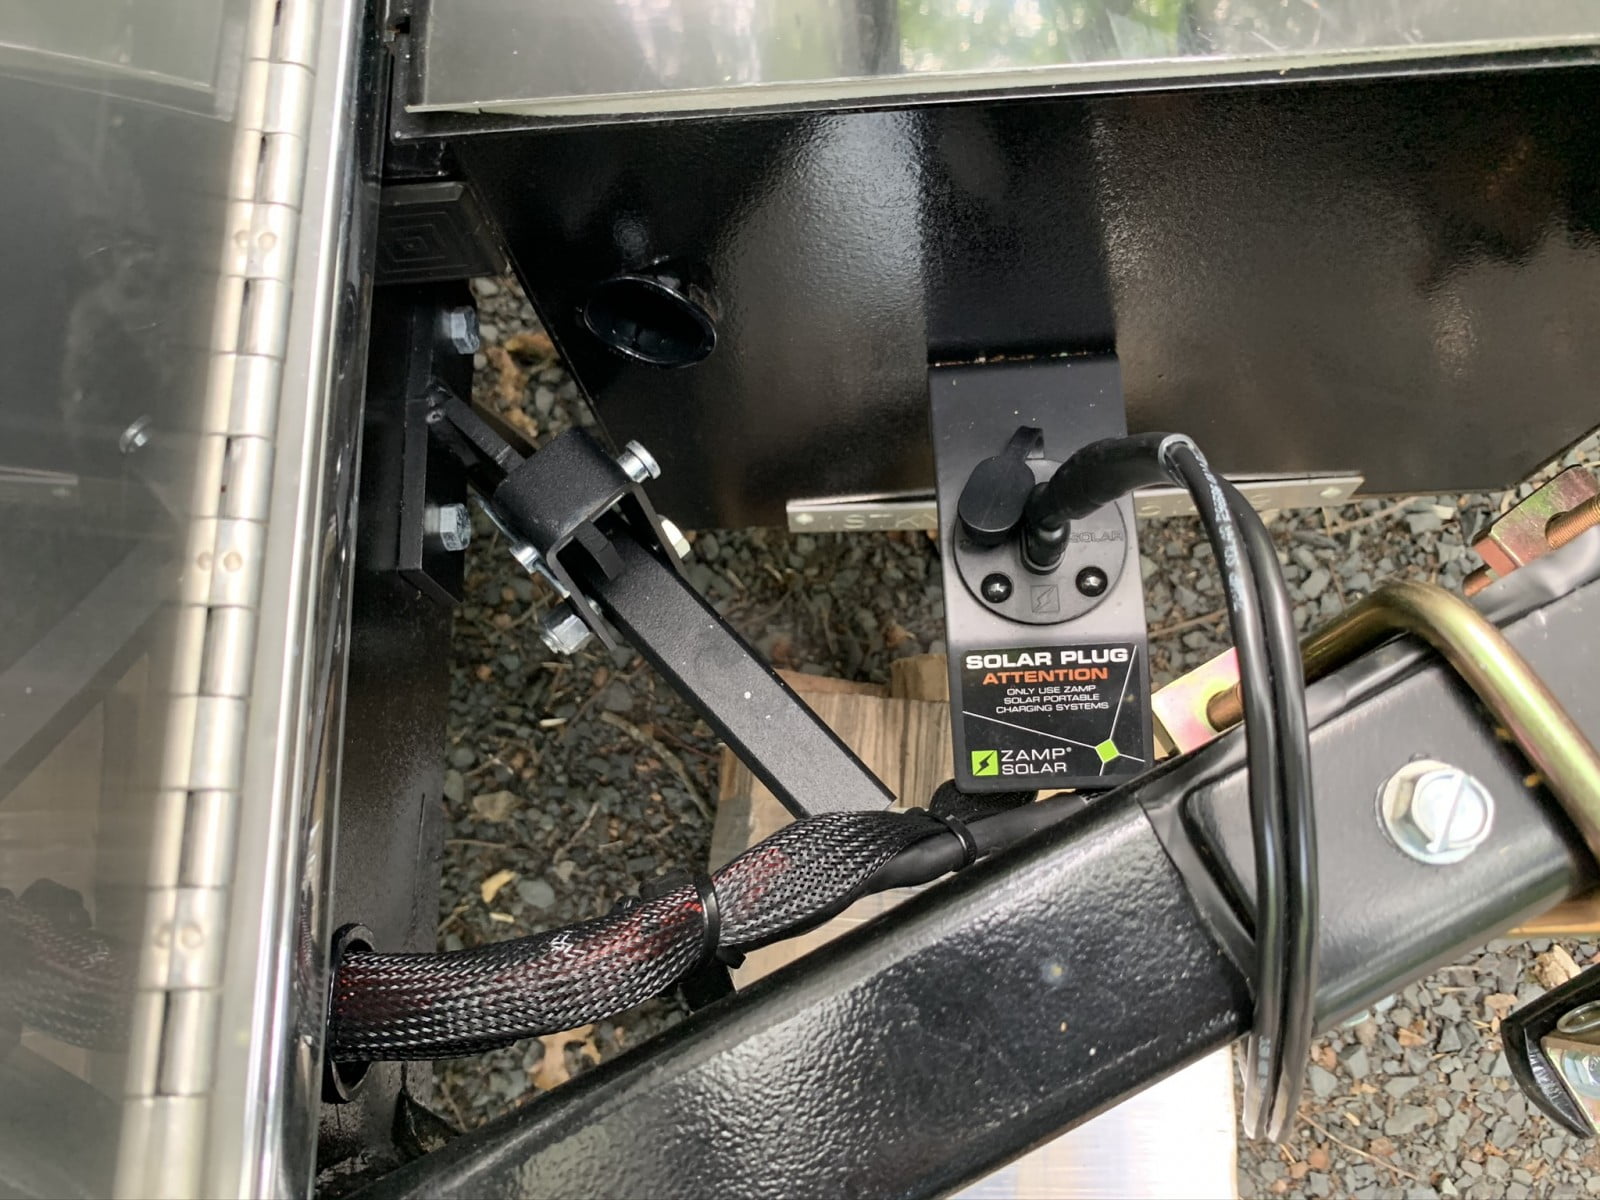 Solar plugin port for portable solar panels at the front of a new Airstream RV.